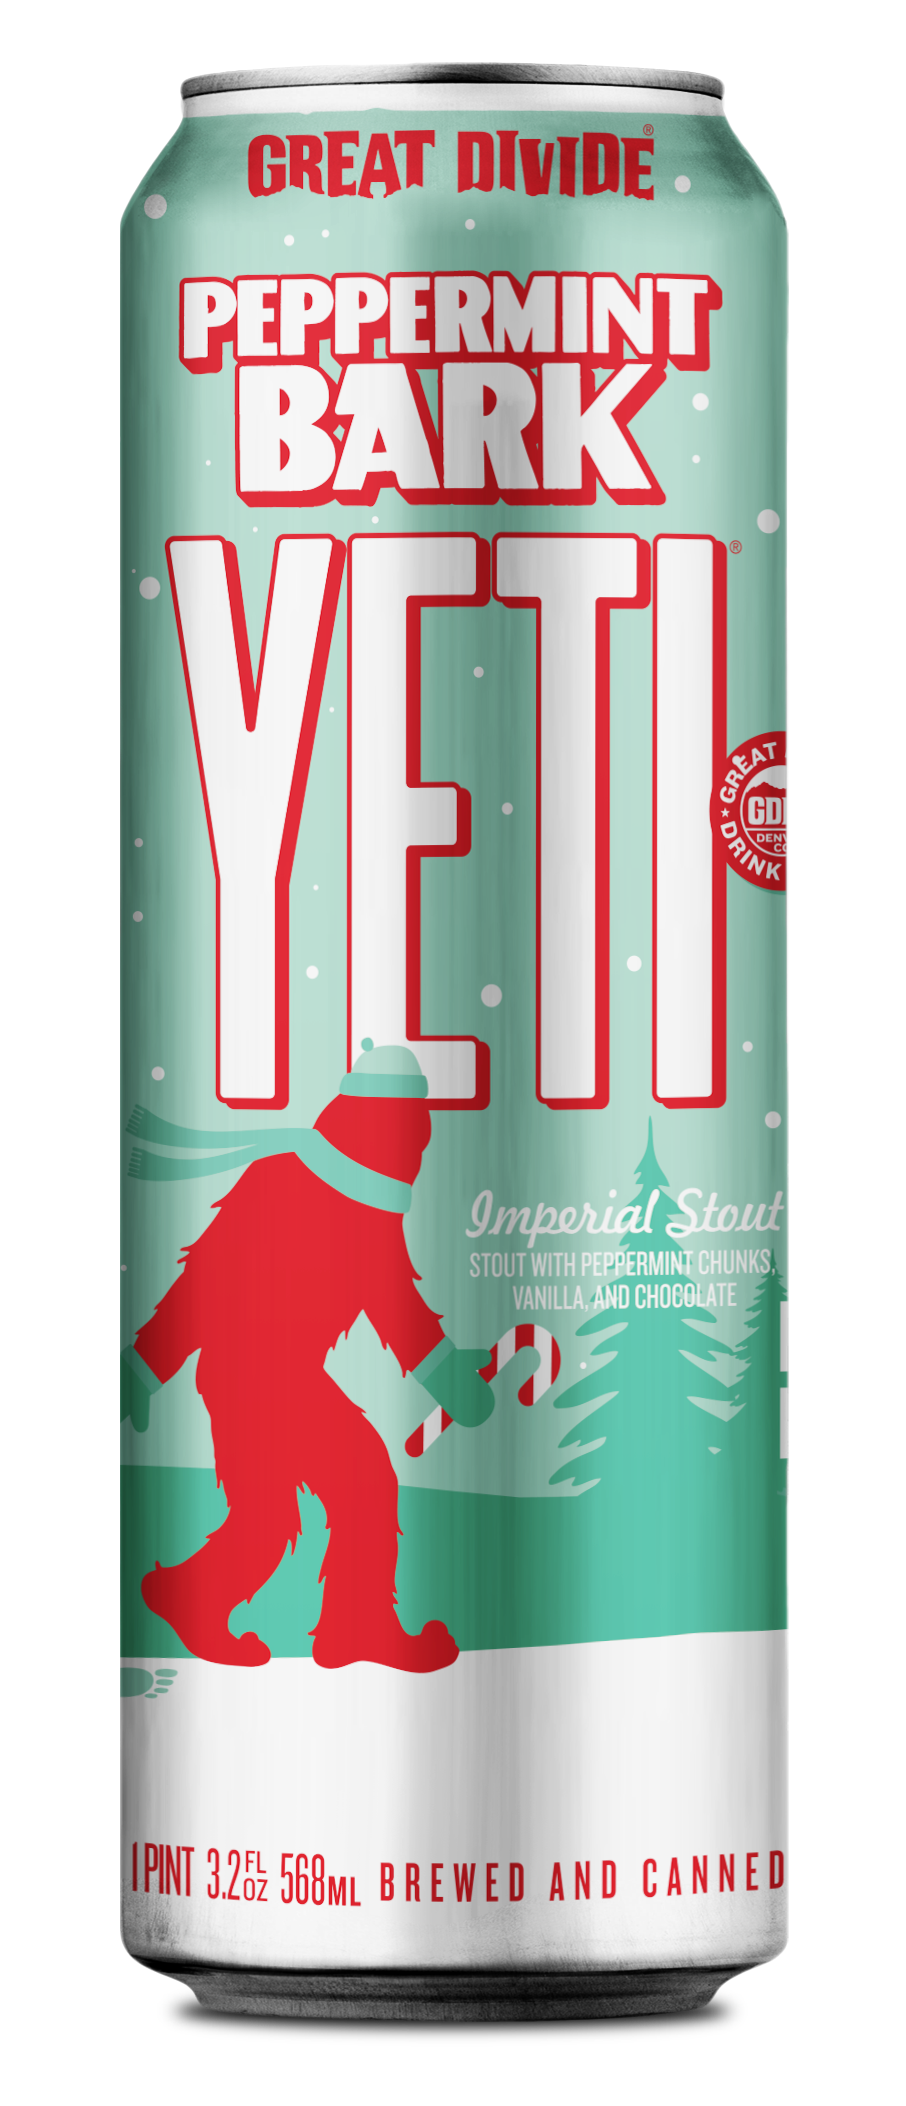 Buy Great Divide Peppermint Bark Yeti Online -Craft City